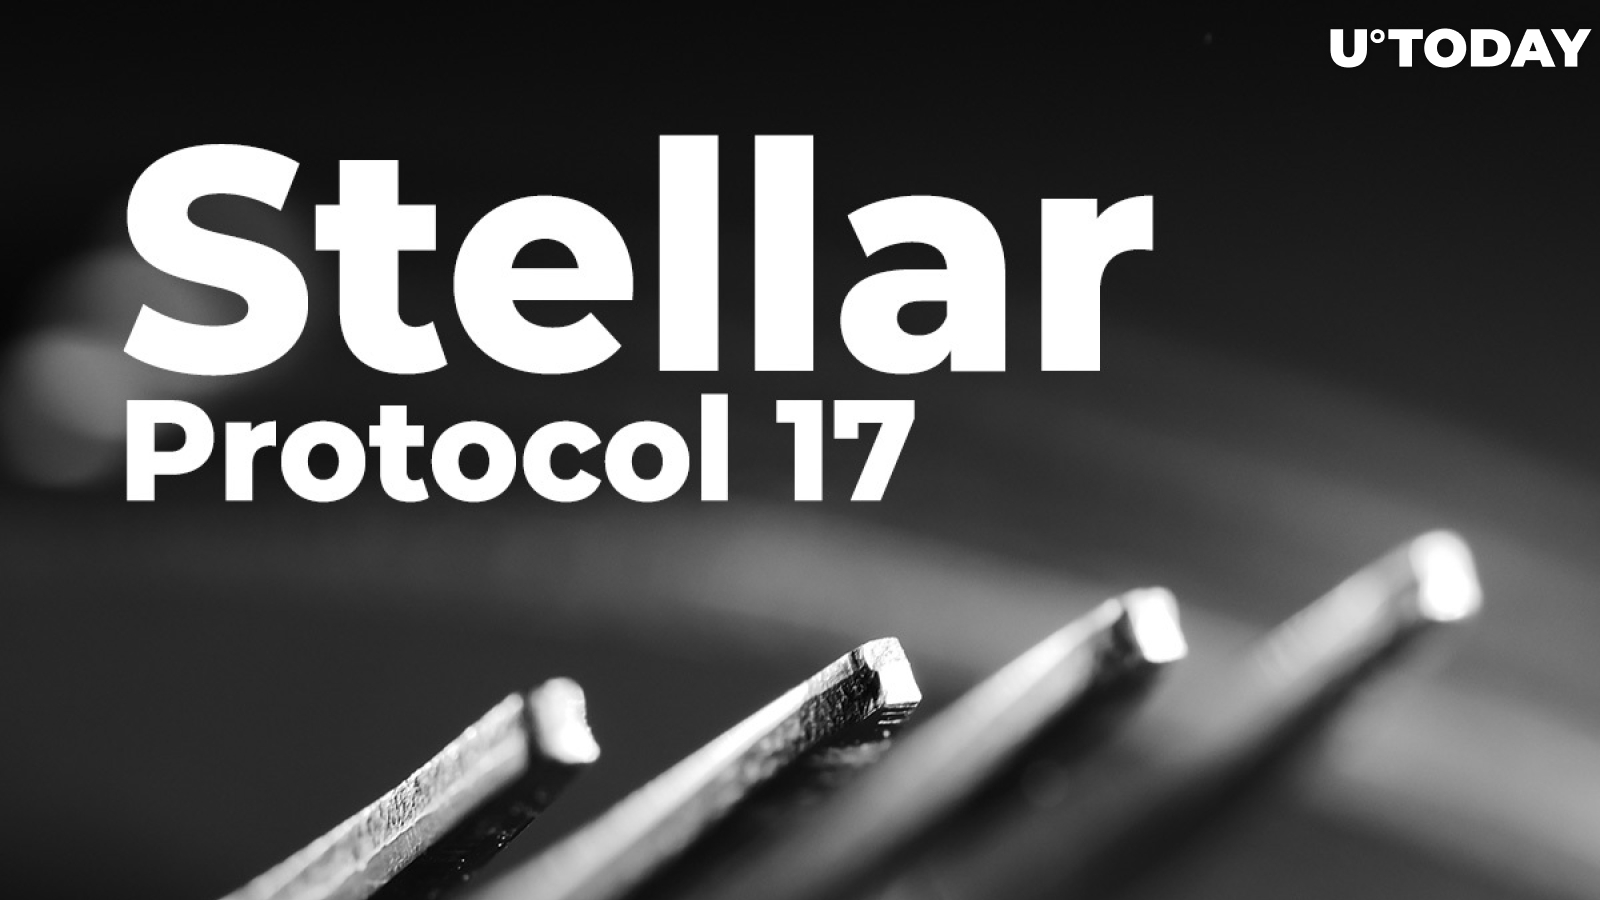 Stellar (XLM) to Undergo Protocol 17 Hardfork with Crucial Update. Why Does It Matter?